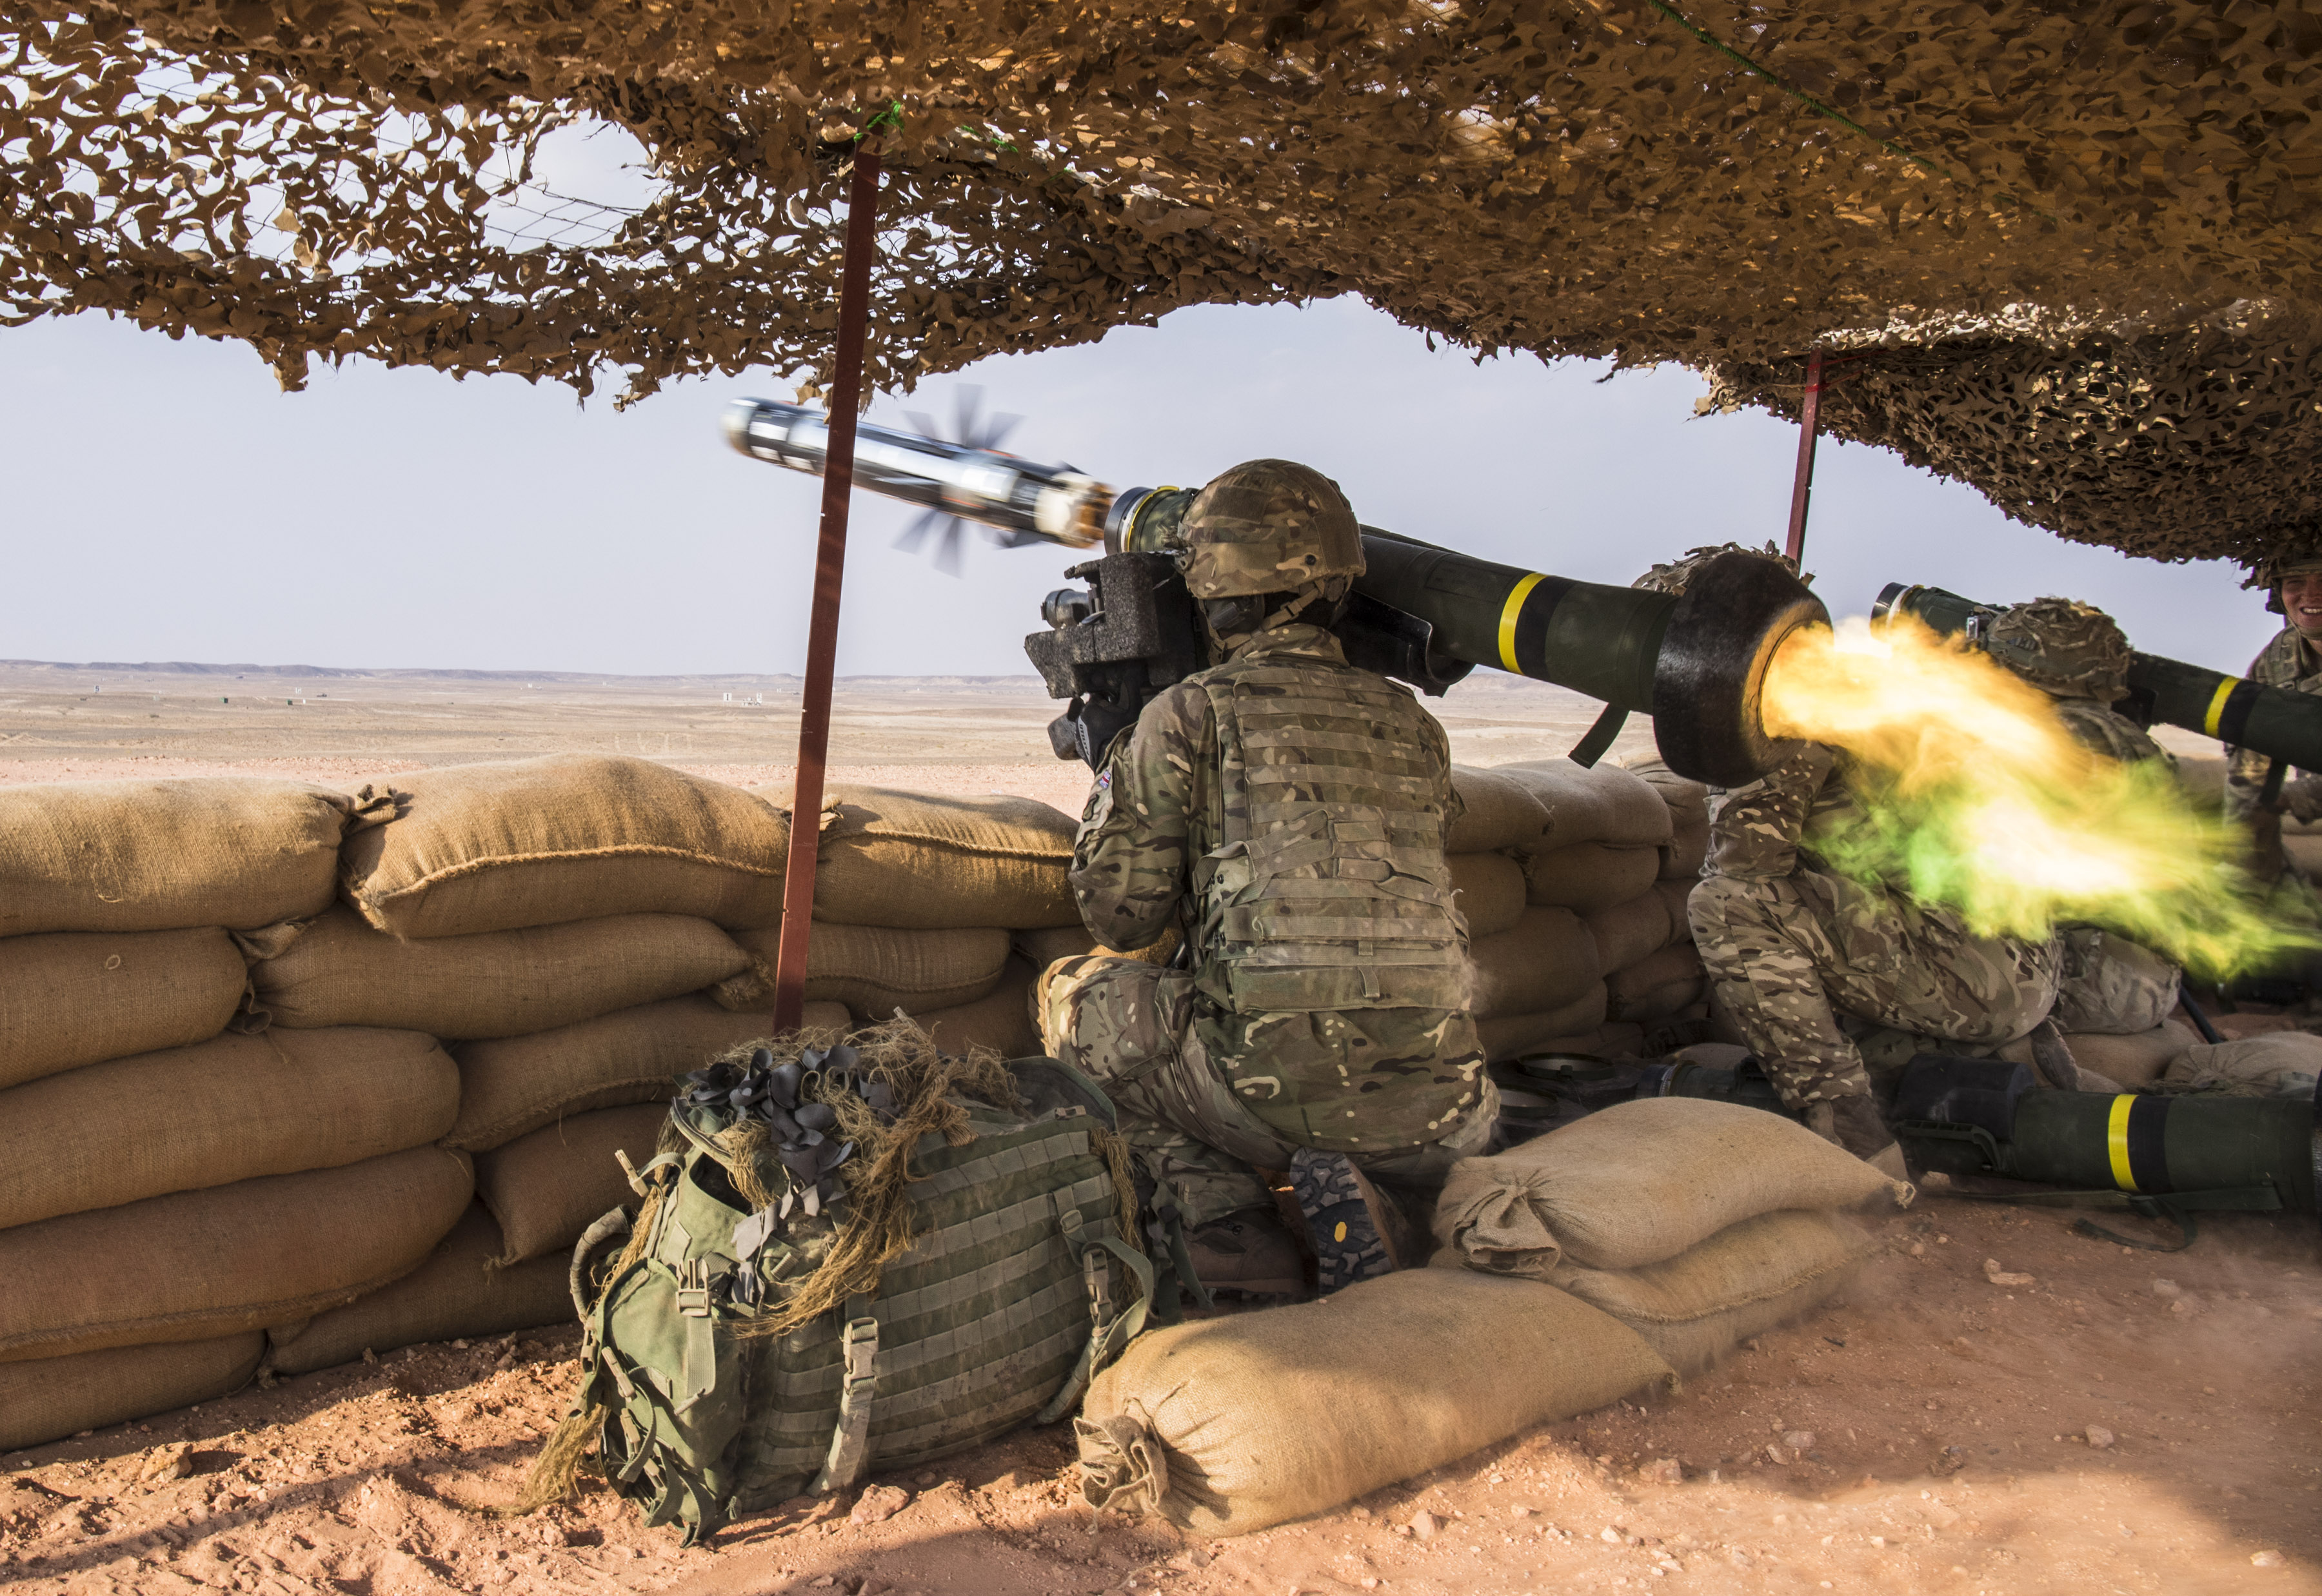 Pictured: A Javelin missile is fired by 1 Mercian at the Fire Power Demonstation Area near the Convoy Support Centre during Exercise Saif Sareea 3 in Oman. A total of 4 Javelin missiles were fired today for training purposes at the Fire Power Demonstation Area by The British Army 1 Mercian Unit.